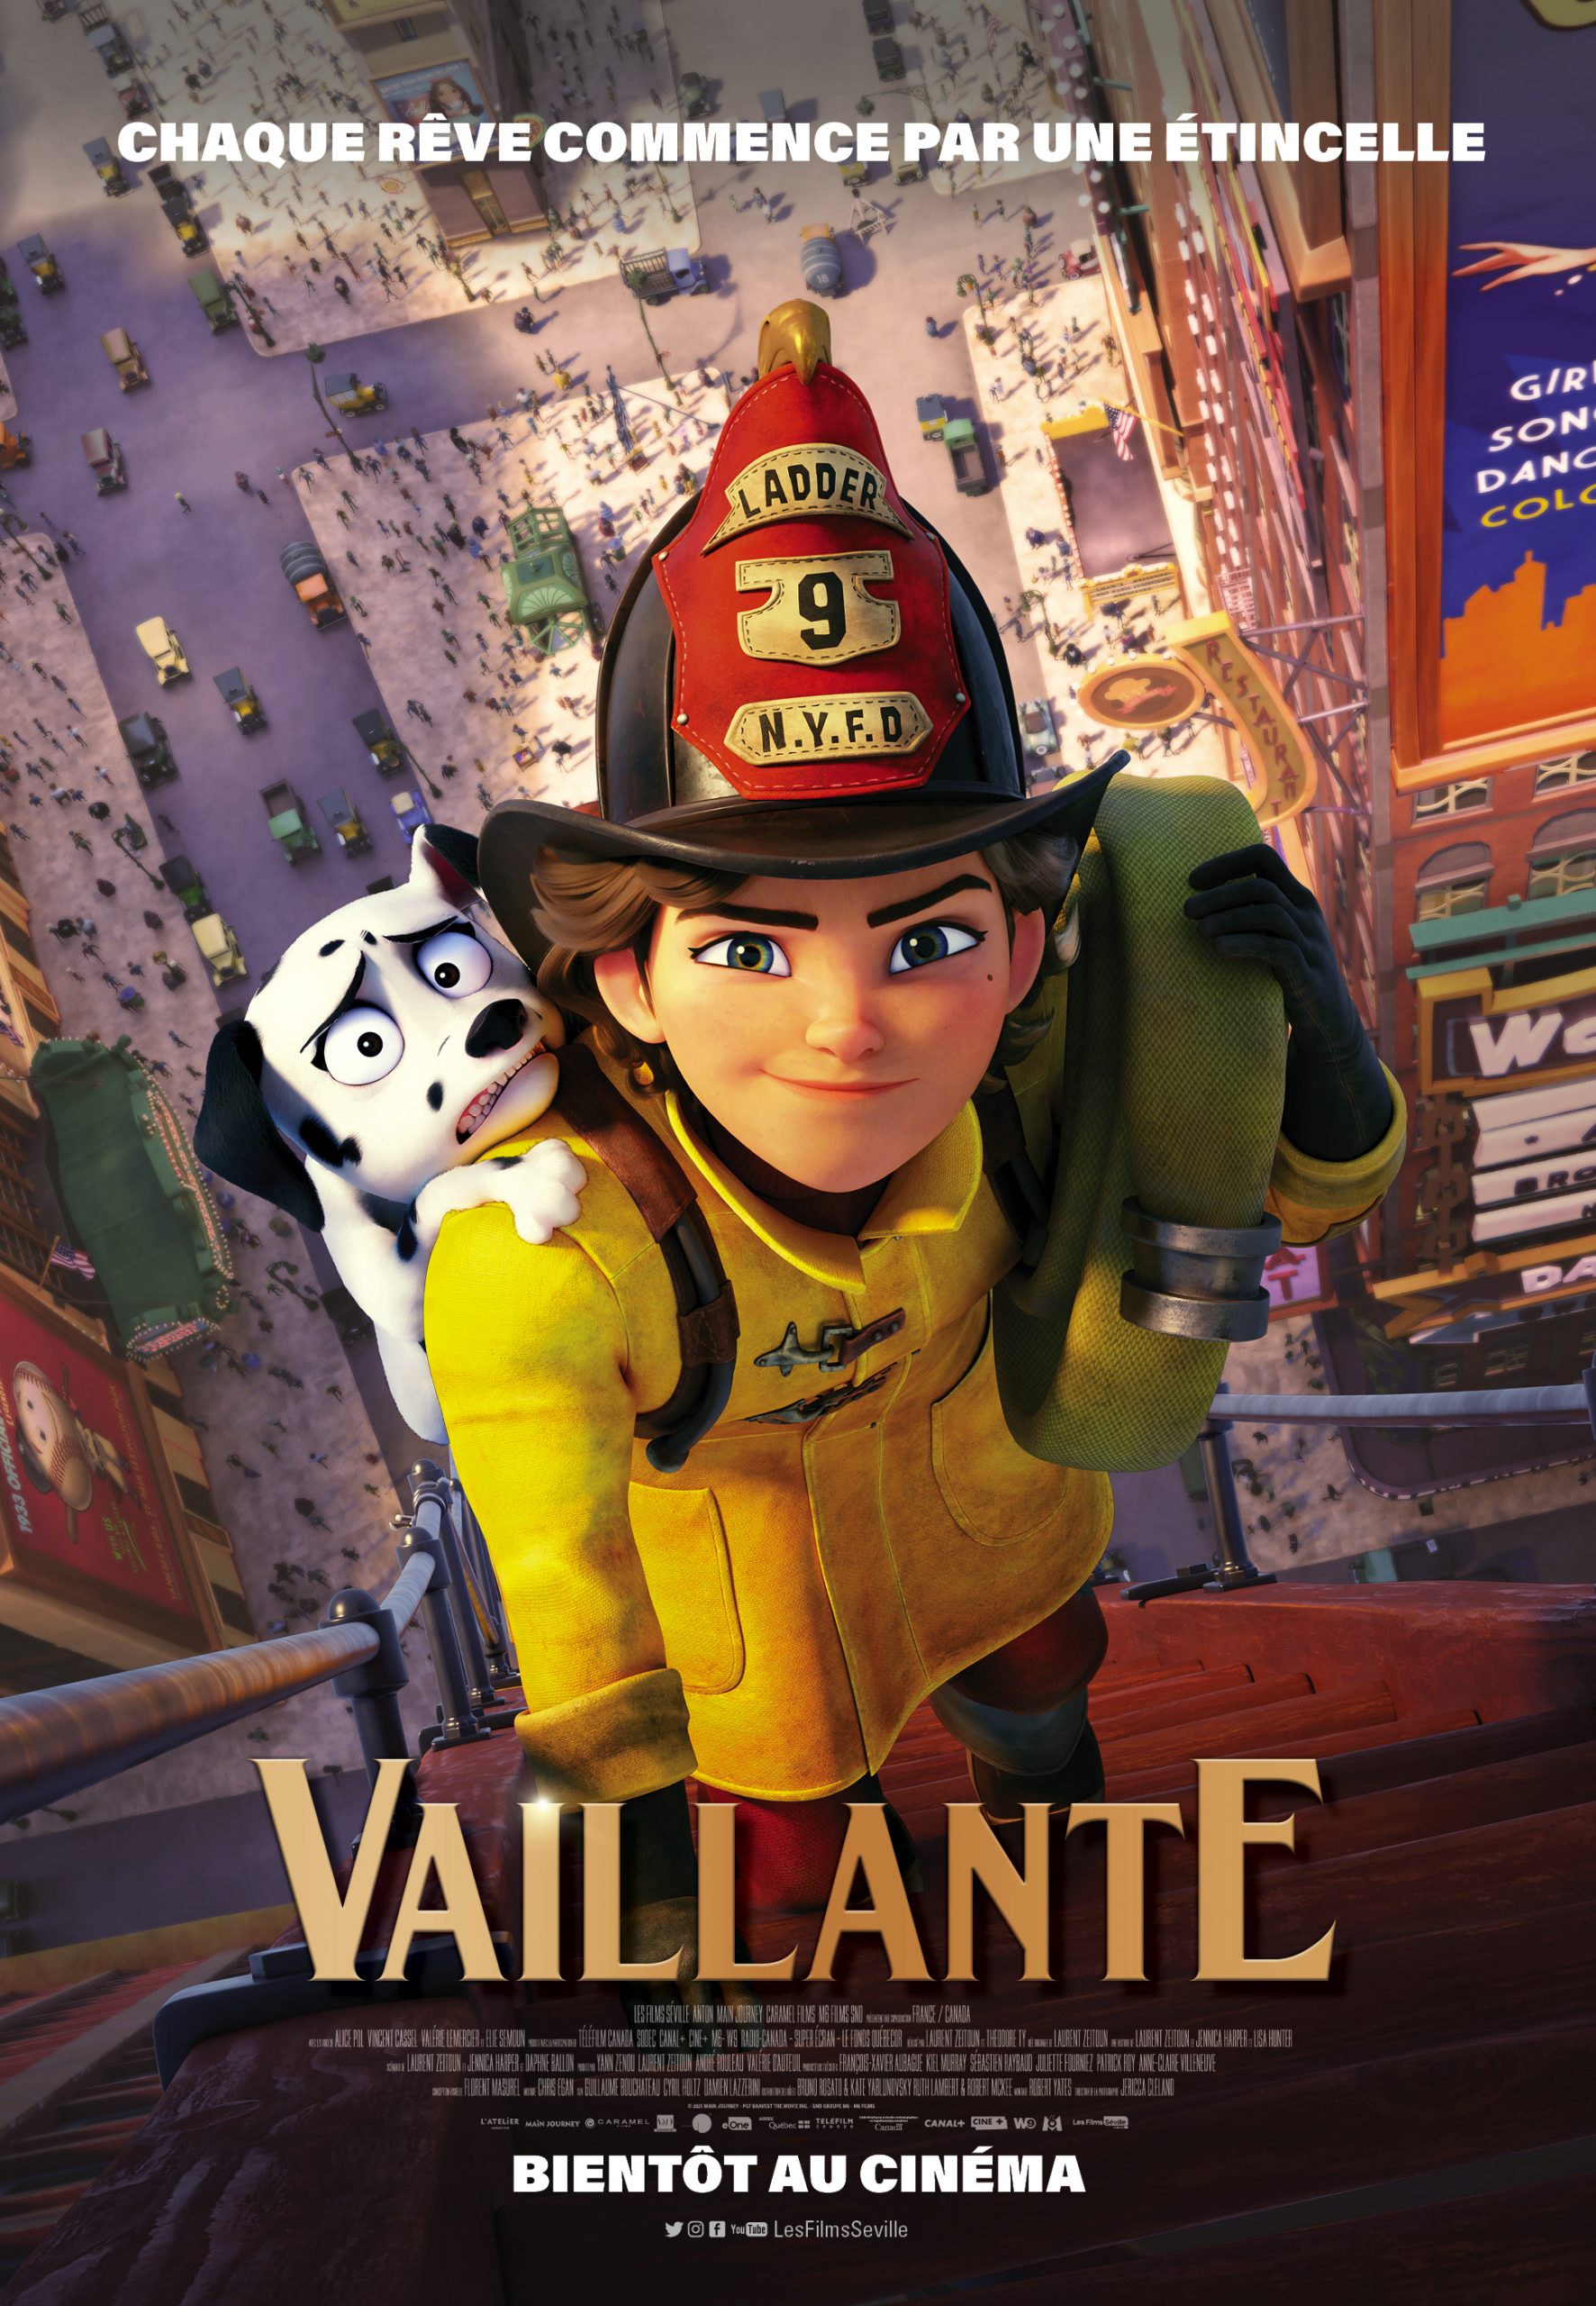 Vaillante (Fireheart) – Check out the poster and trailer!